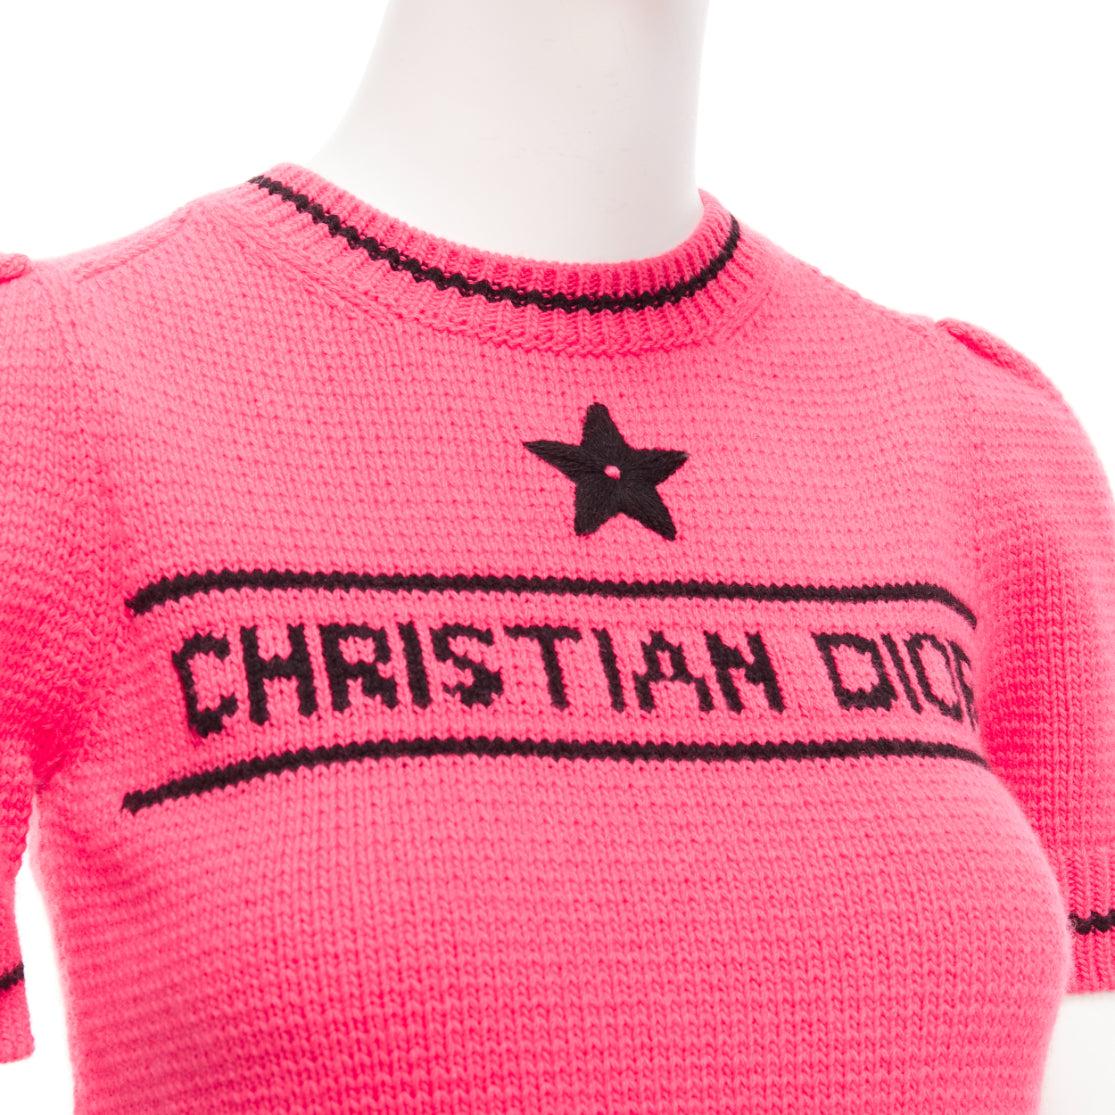 CHRISTIAN DIOR 2022 100% cashmere pink black logo puff sleeve crop sweater FR34 XXS
Reference: AAWC/A00828
Brand: Dior
Designer: Maria Grazia Chiuri
Collection: 2022
Material: Wool, Cashmere
Color: Pink, Black
Pattern: Star
Closure: Slip On
Made in: